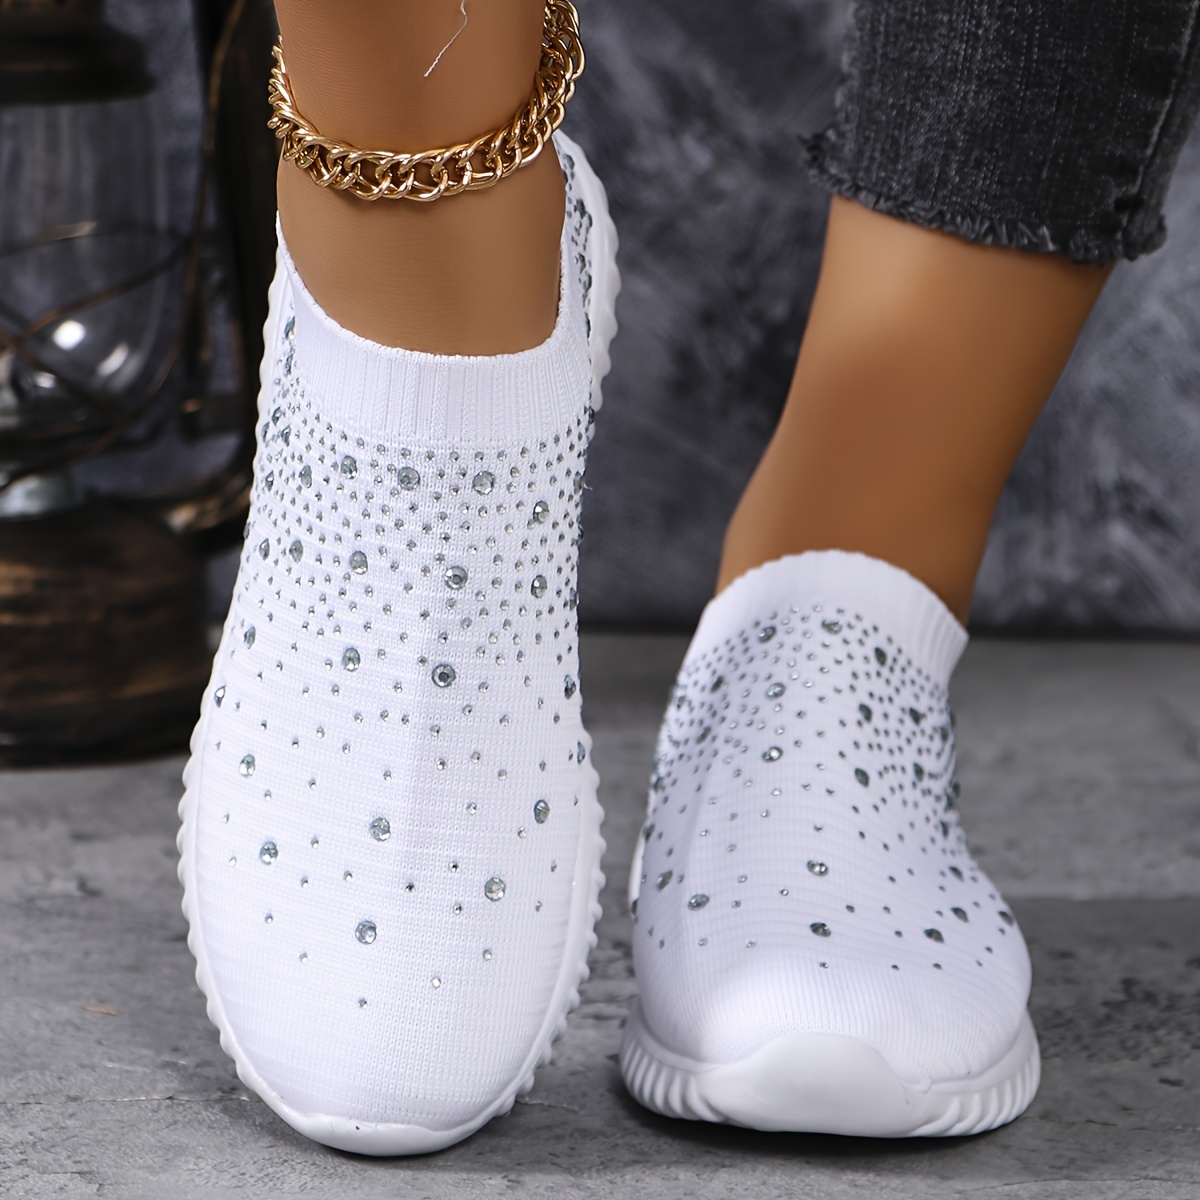 

Women's Walking Sneakers With Rhinestone Decor, Breathable Fabric Casual Shoes, Comfortable Athletic Camp Shoes, Slip-on Trainer Footwear With Chunky Sole